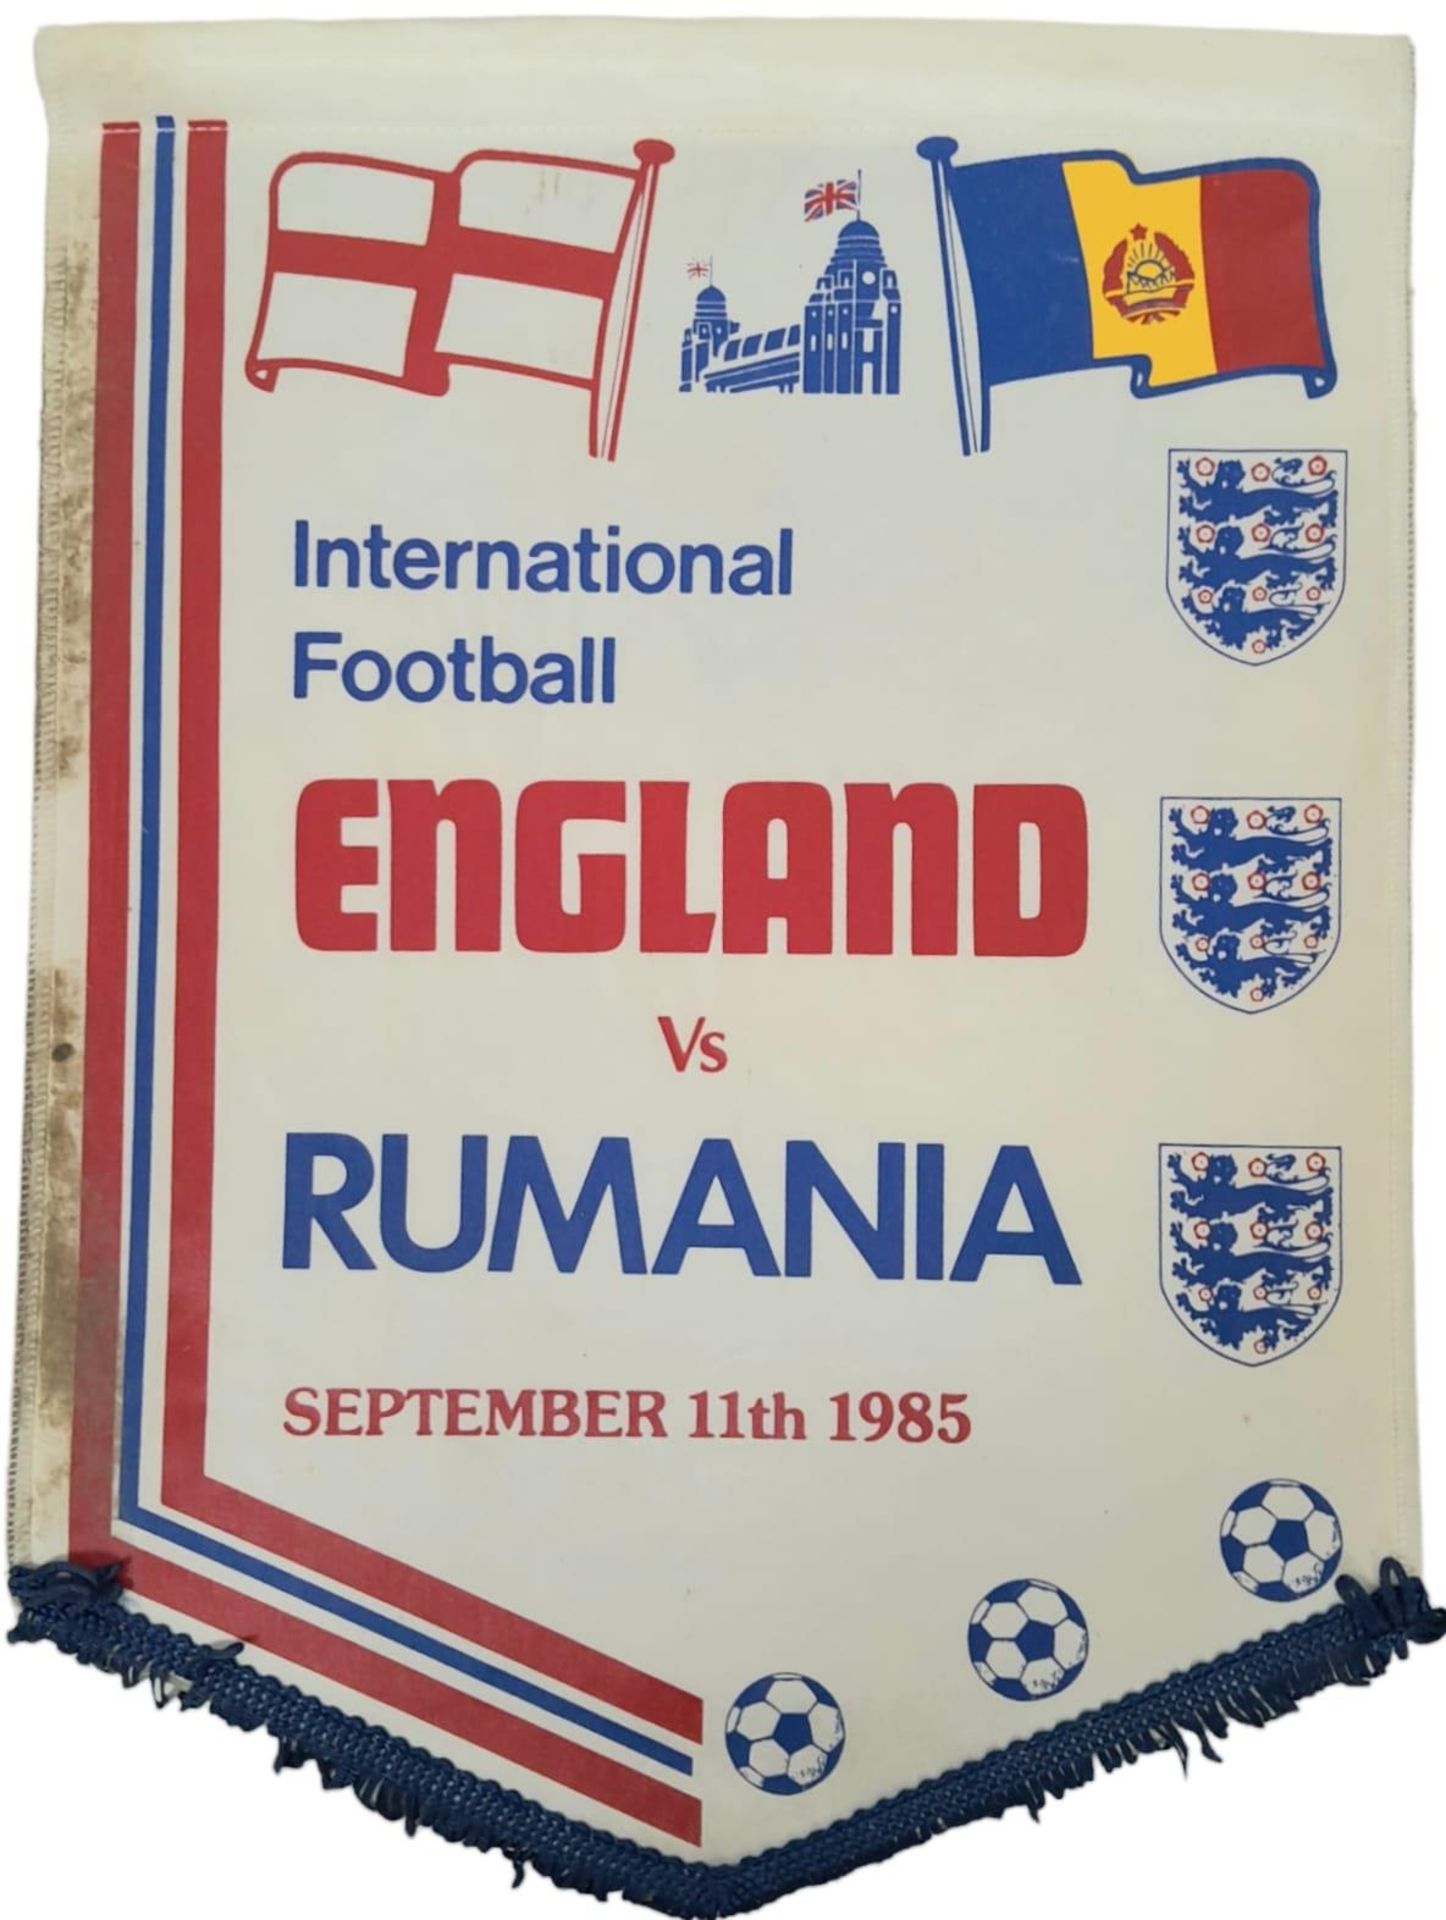 A COLLECTION OF 11 ENGLAND FOOTBALL MATCH PENNANTS FROM DIFFERENT INTERNATIONAL MATCHES , - Image 2 of 4